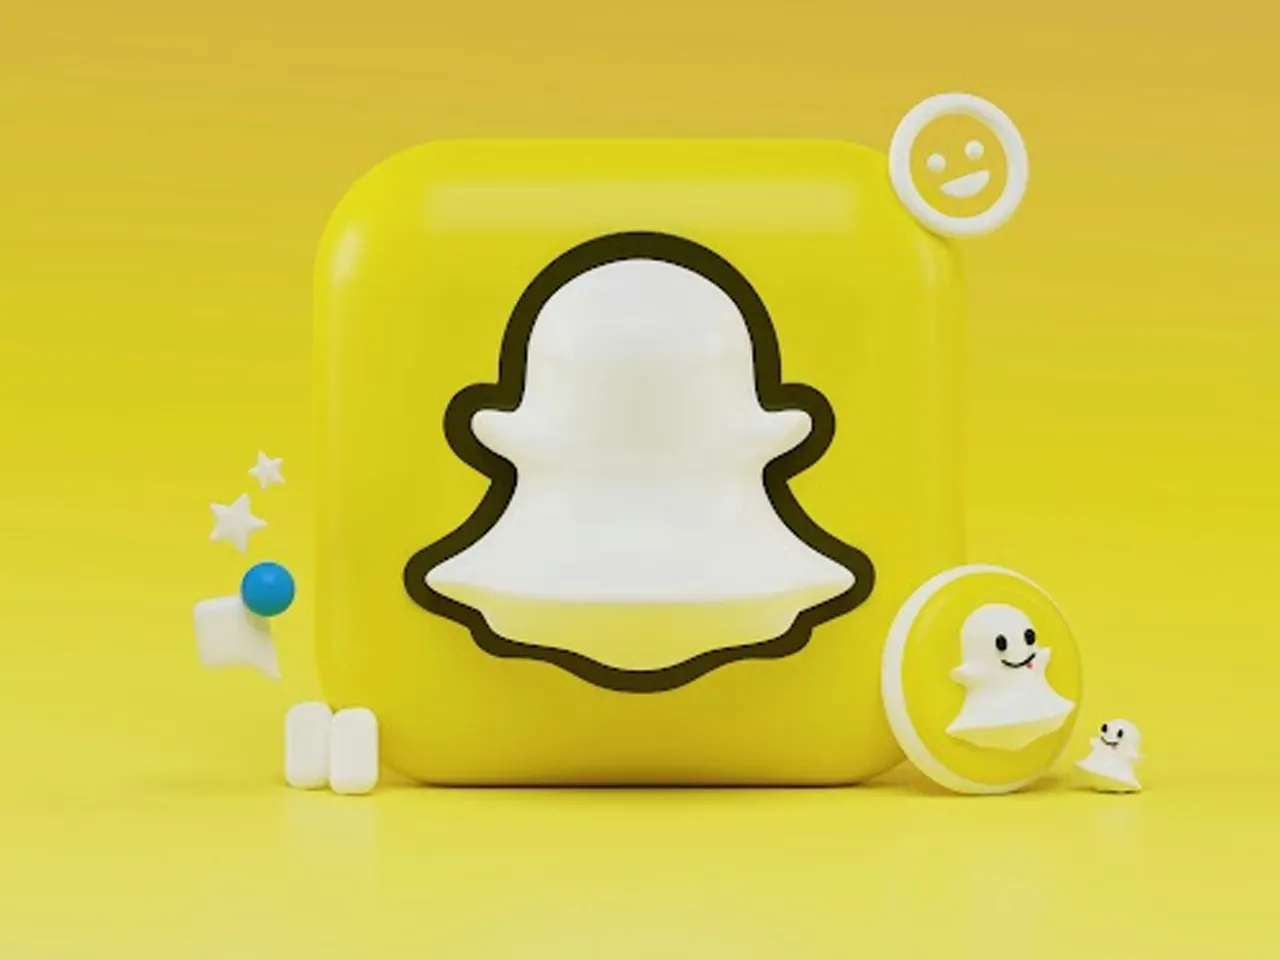 Snapchat is testing an ad-free subscription plan